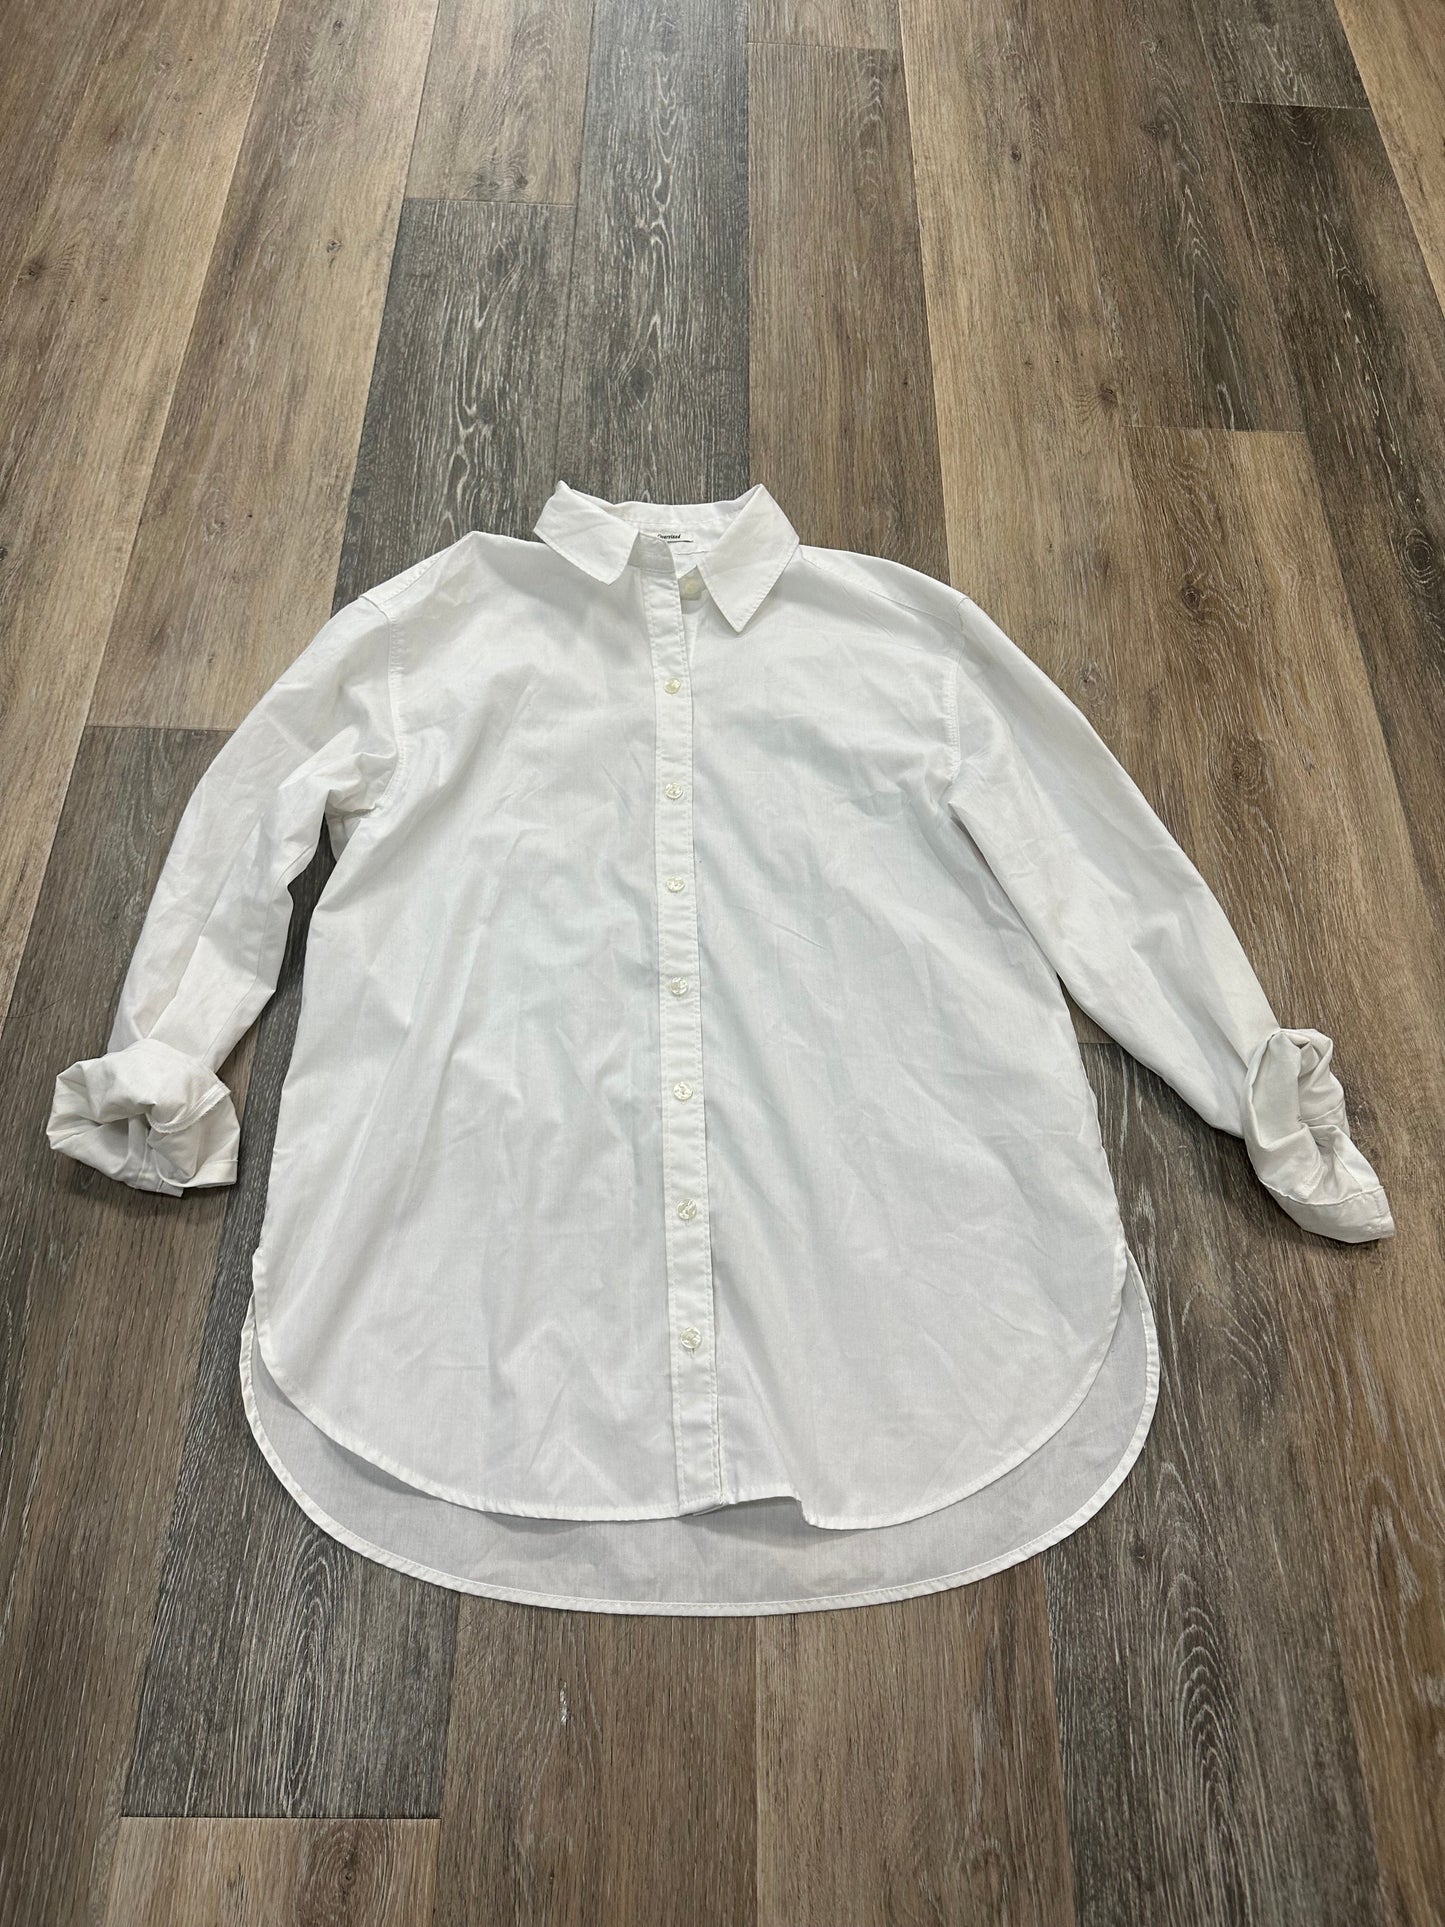 White Blouse Long Sleeve Abercrombie And Fitch, Size Xs